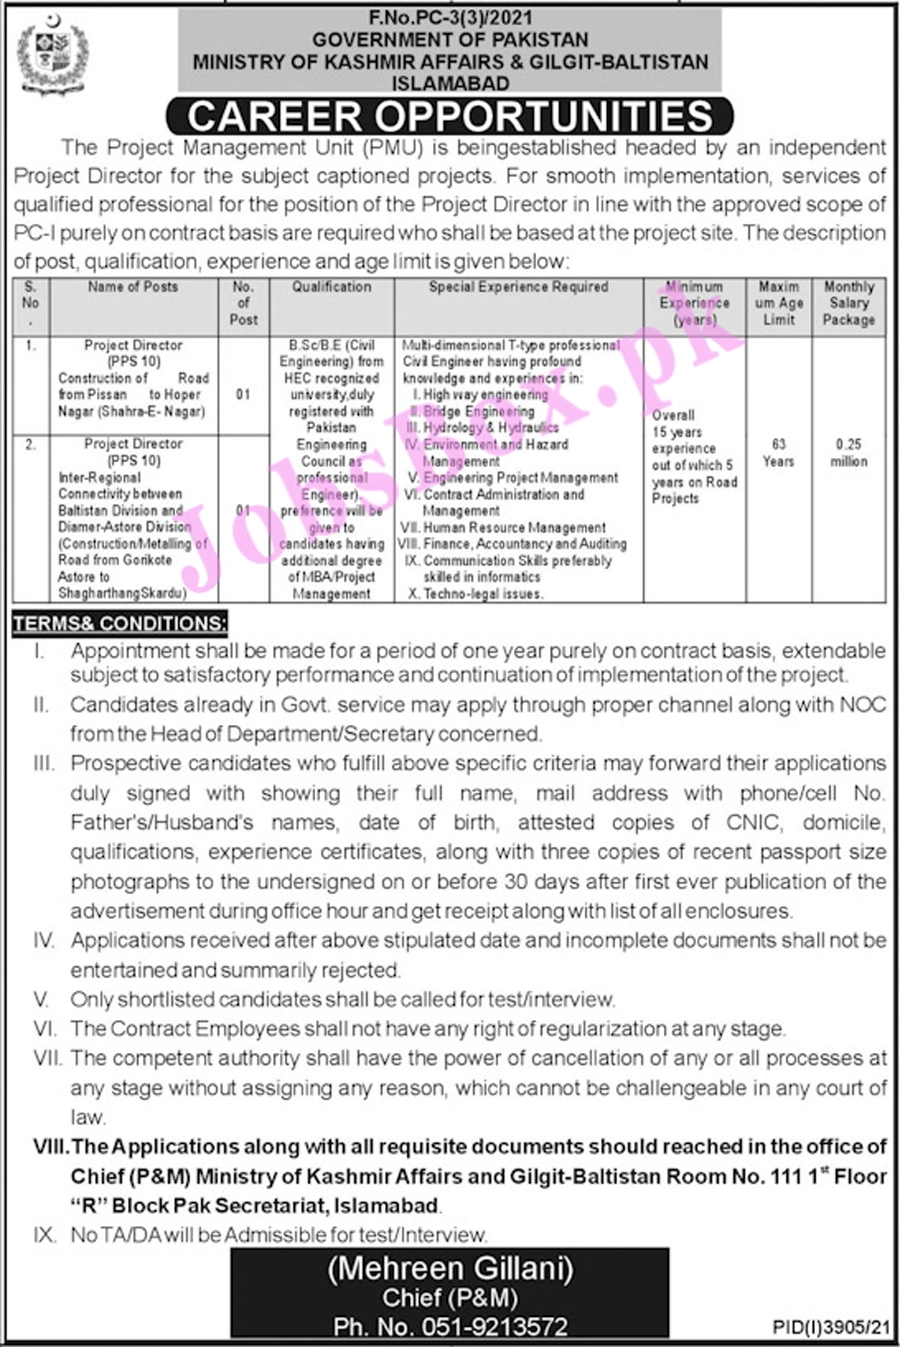 Ministry of Kashmir Affairs & Gilgit Baltistan Jobs 2021 for Project Director